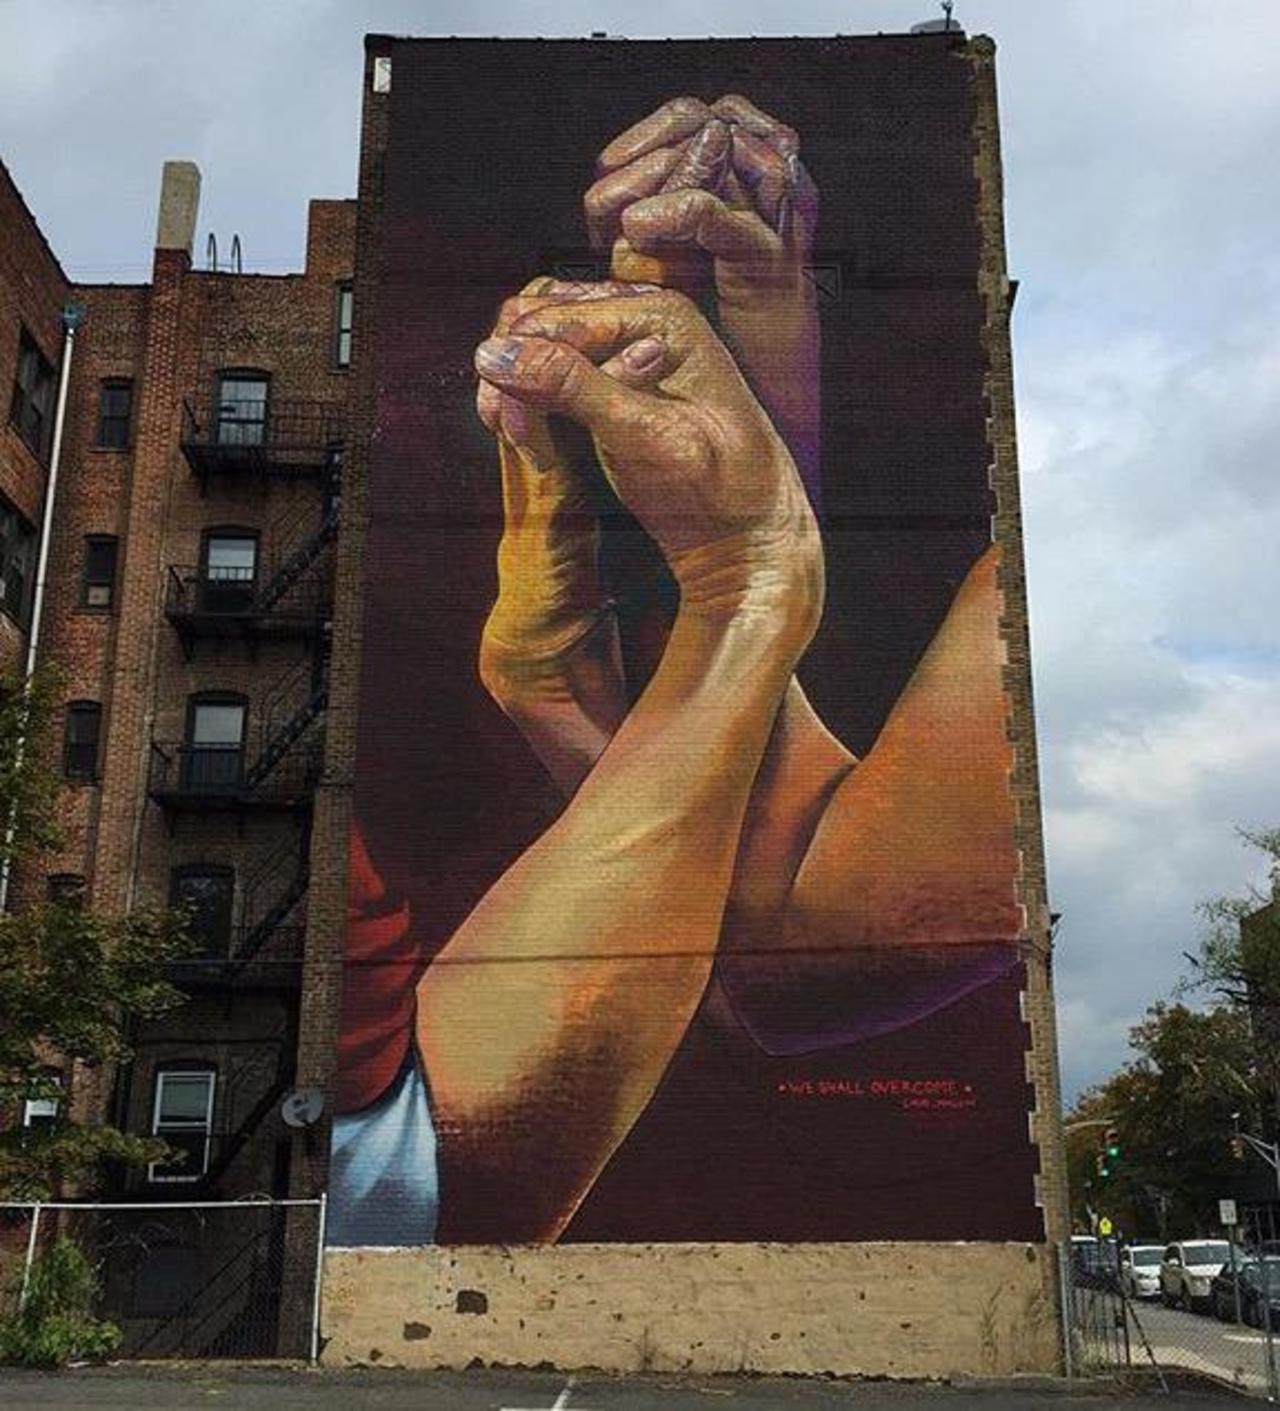 New Street Art by CaseMaclaim in Jersey City for the TheBKcollective 

#art #graffiti #mural #streetart http://t.co/GehjZtbPHW